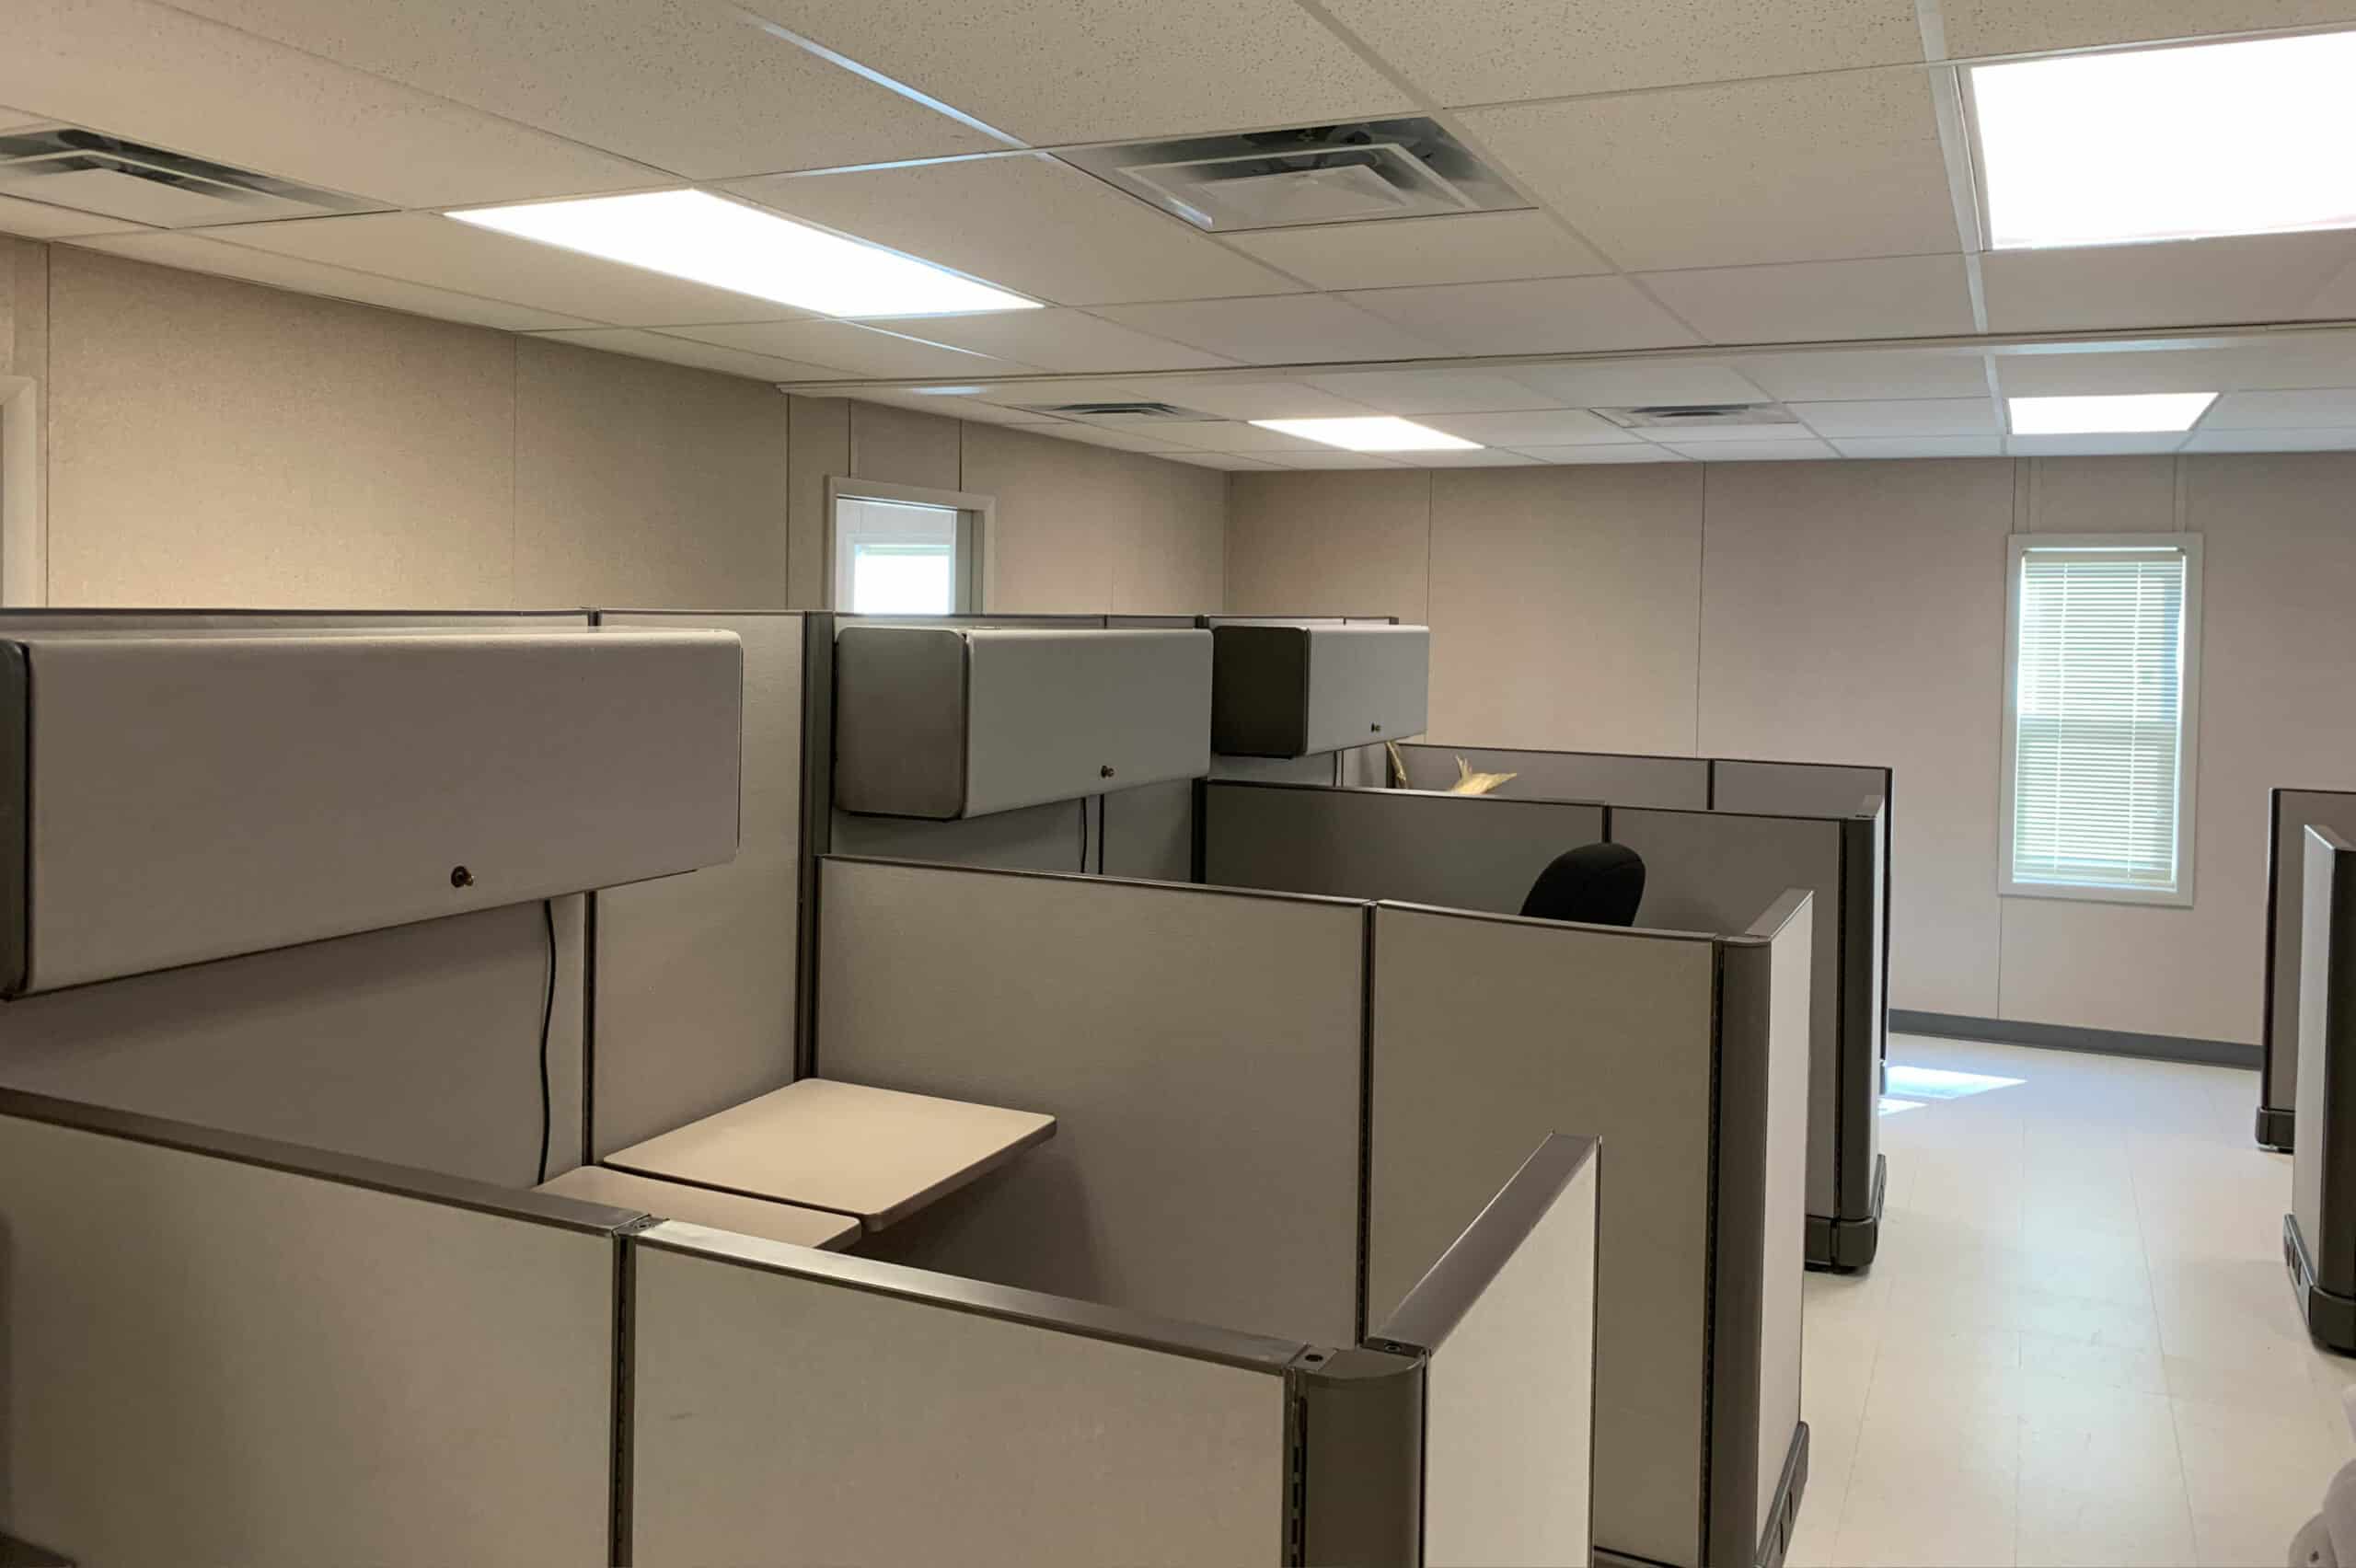 Office cubicles in a modular building.